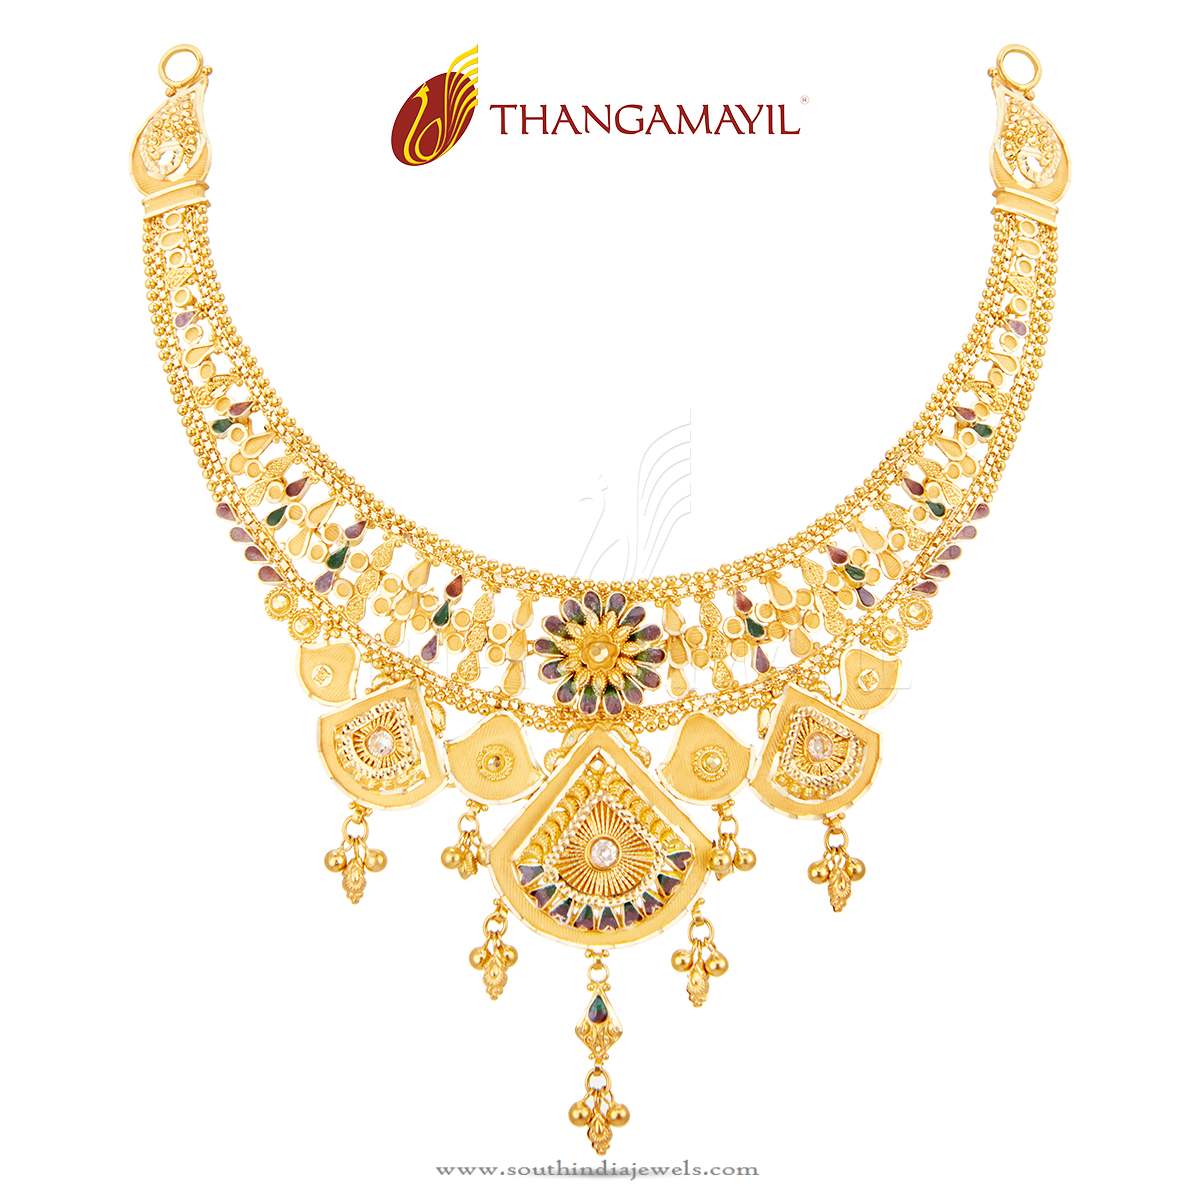 Gold Enamel Necklace from Thangamayil Jewellery